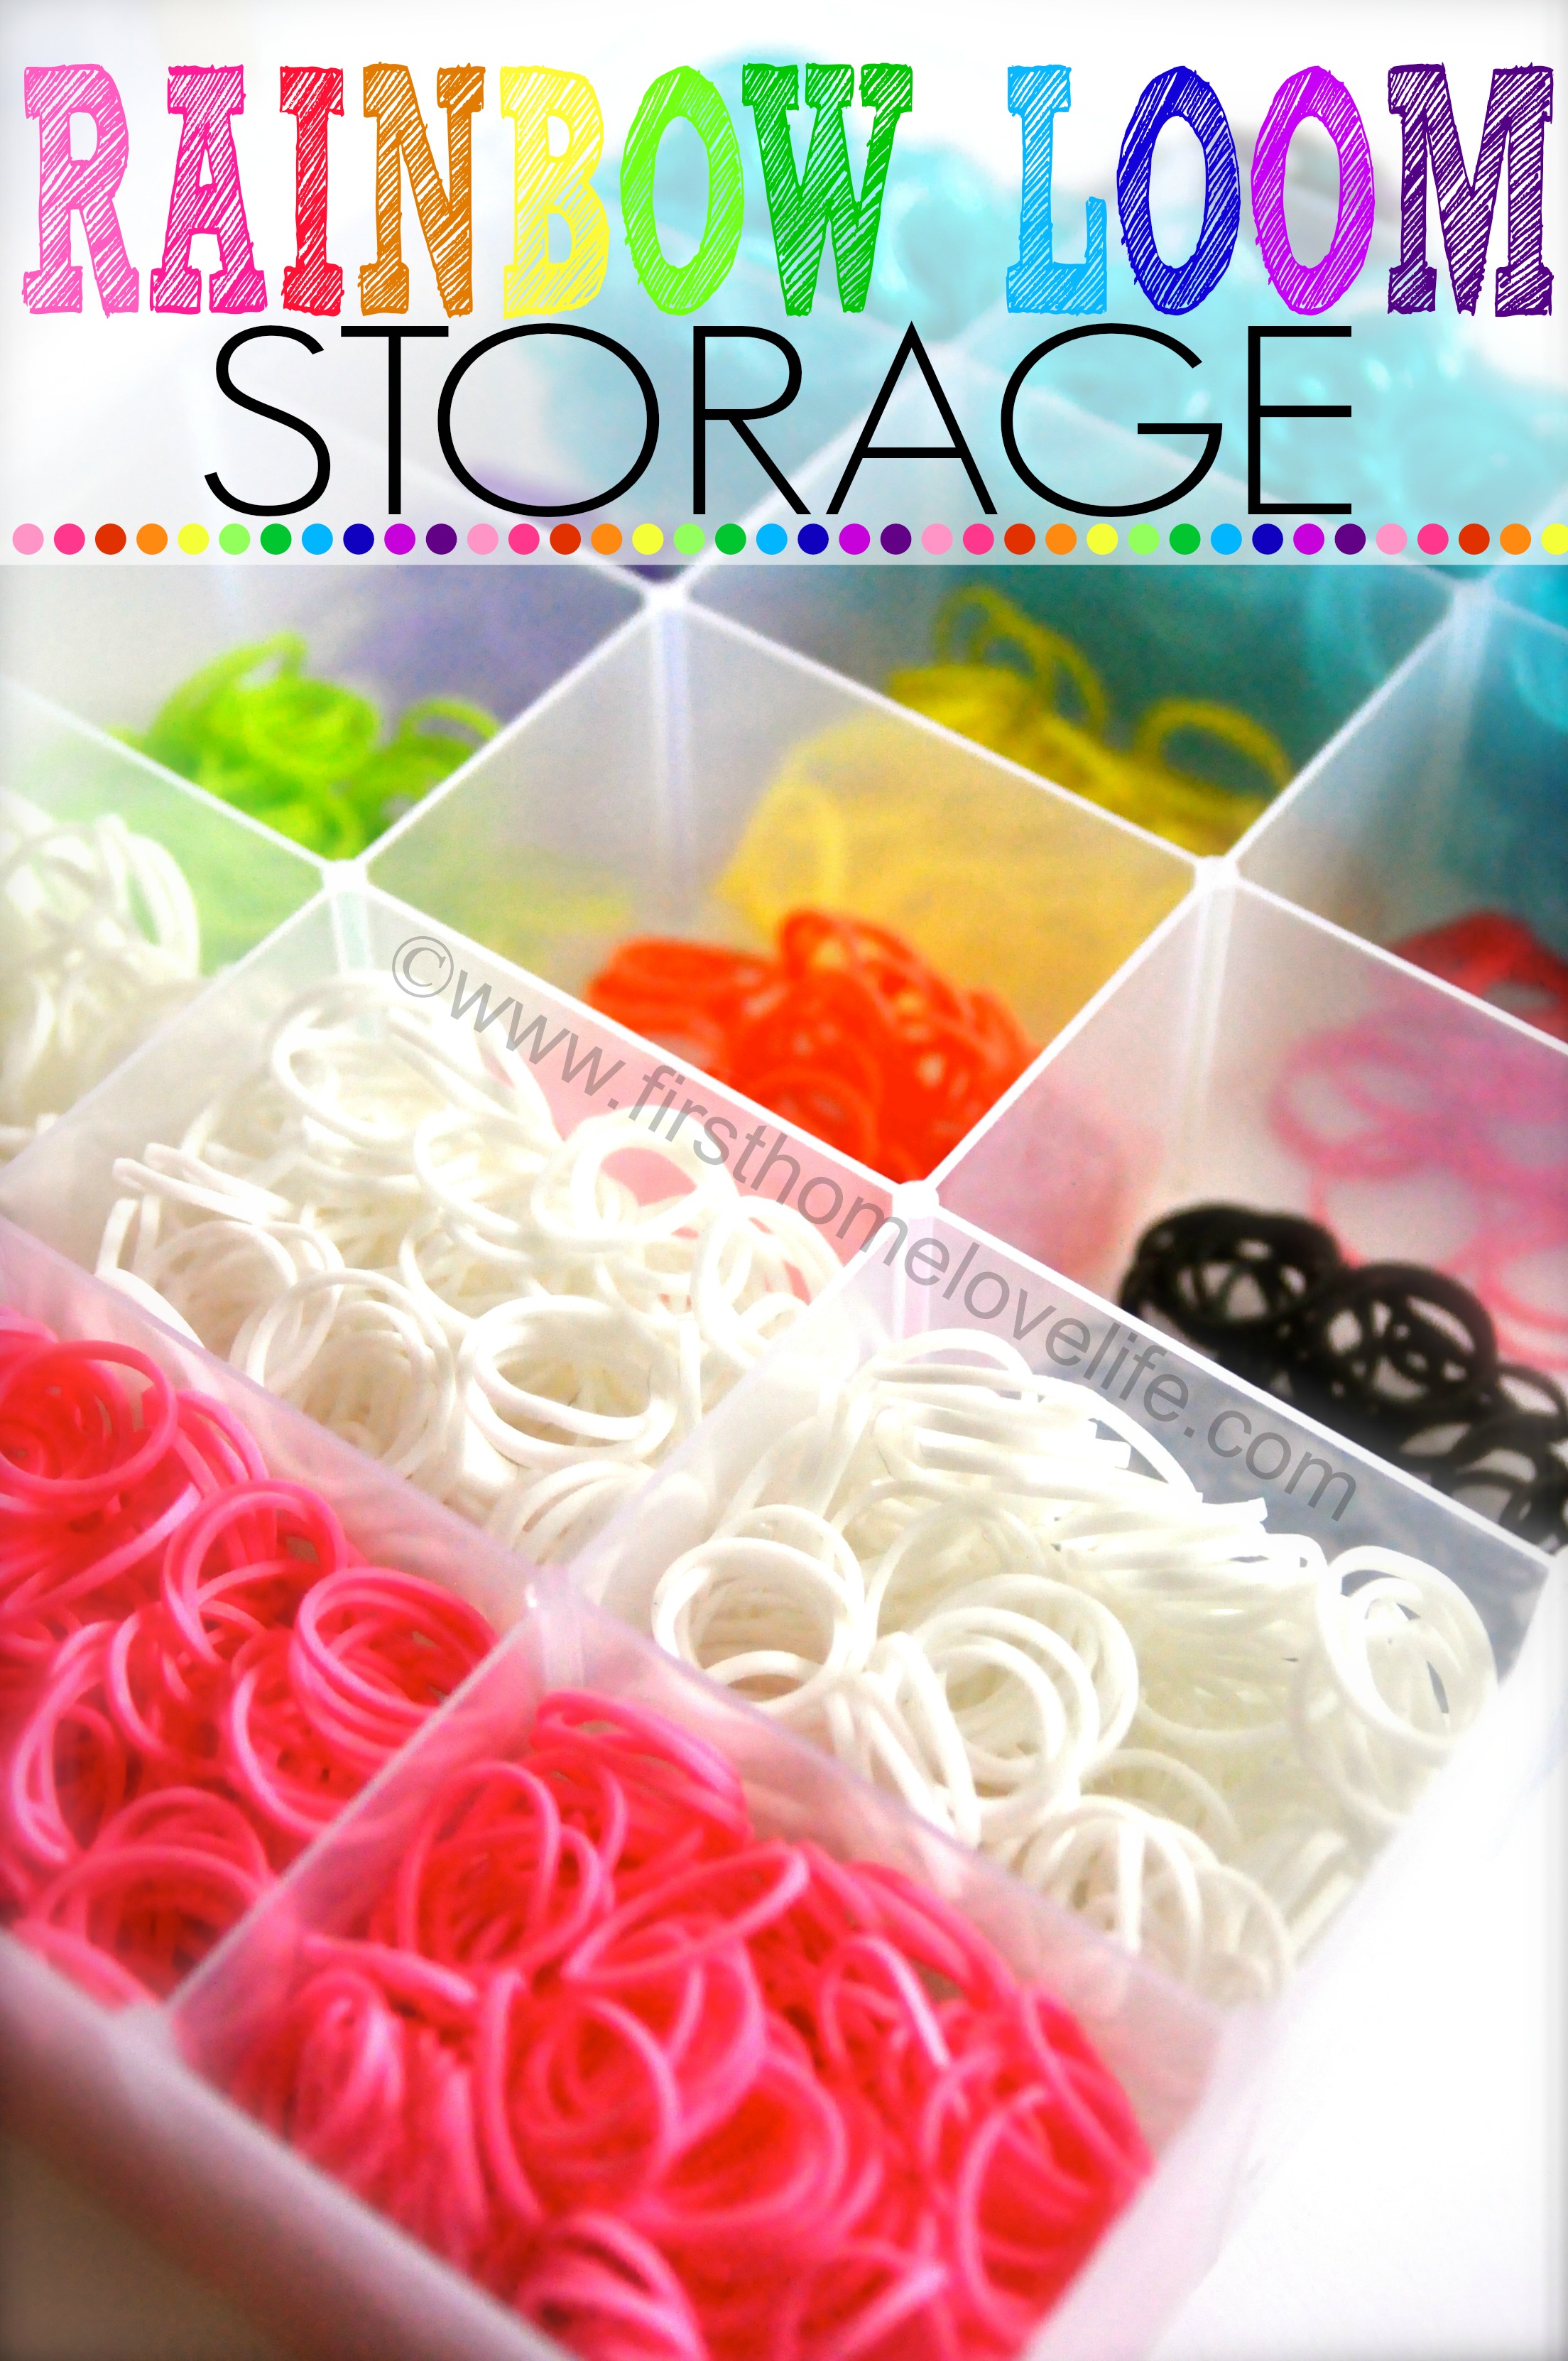 Rainbow loom storage case sold at michaels